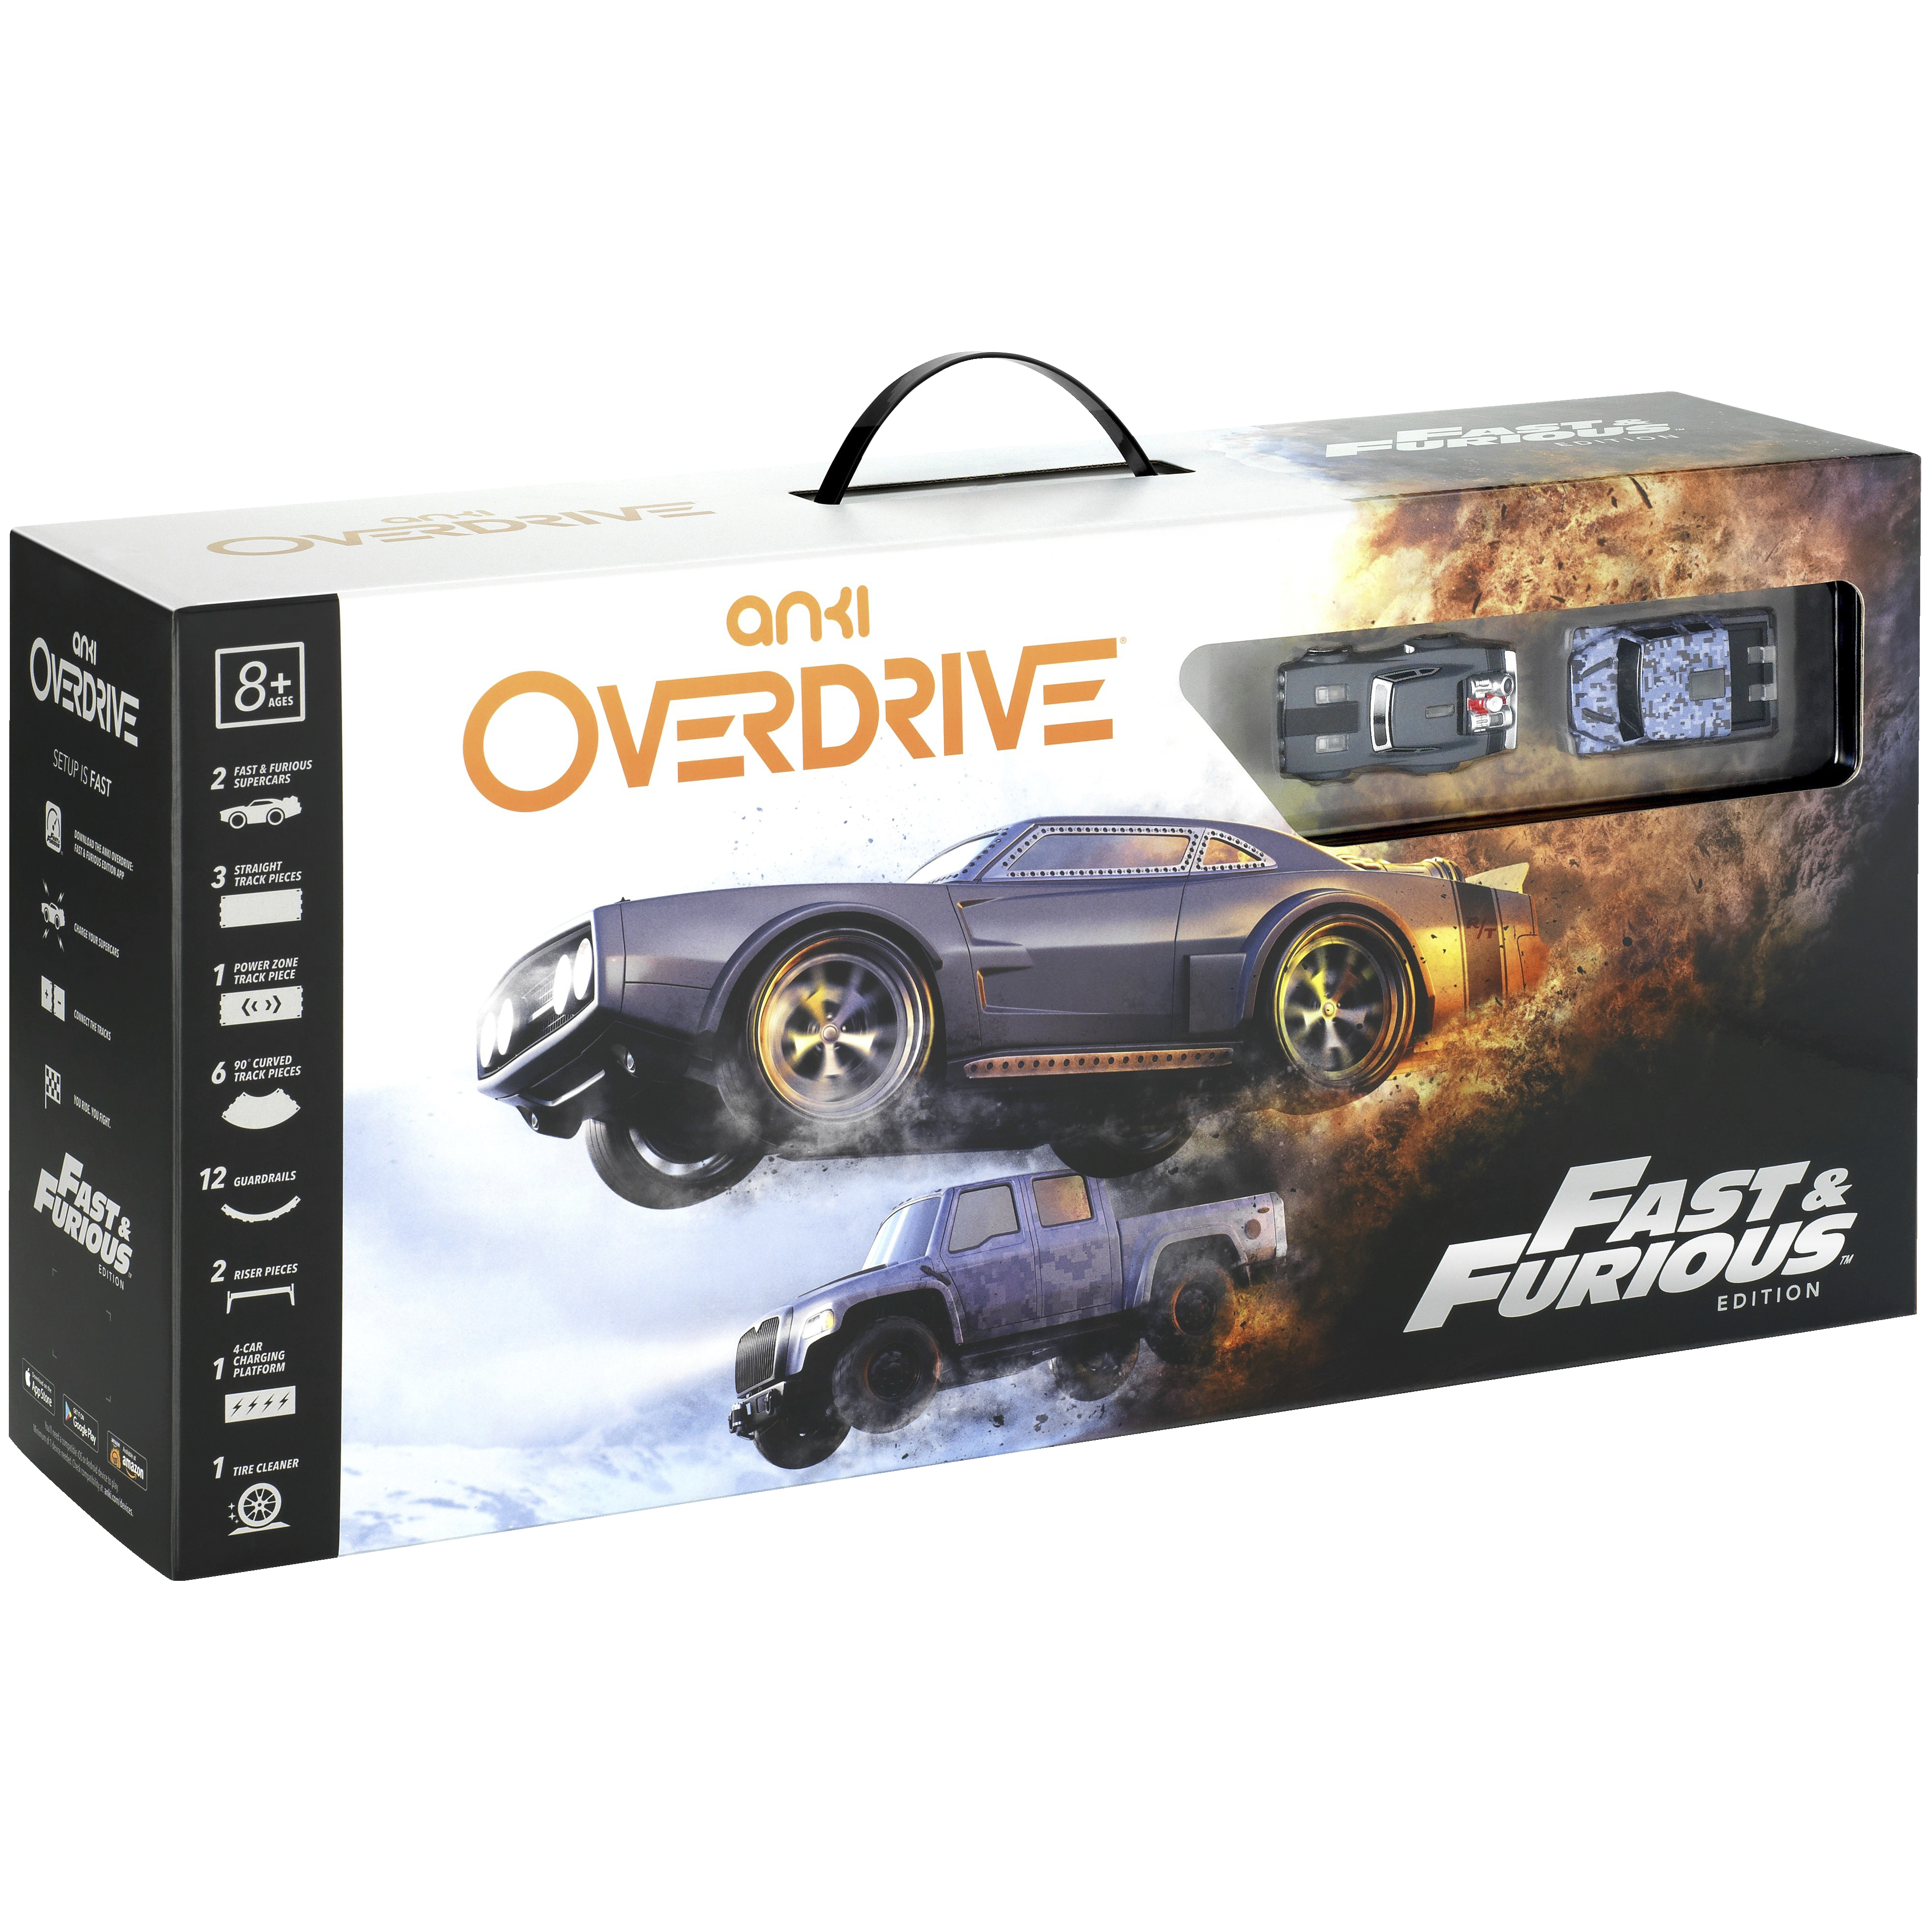 Anki Overdrive race track: Fast and Furious edition - Andet gaming ...